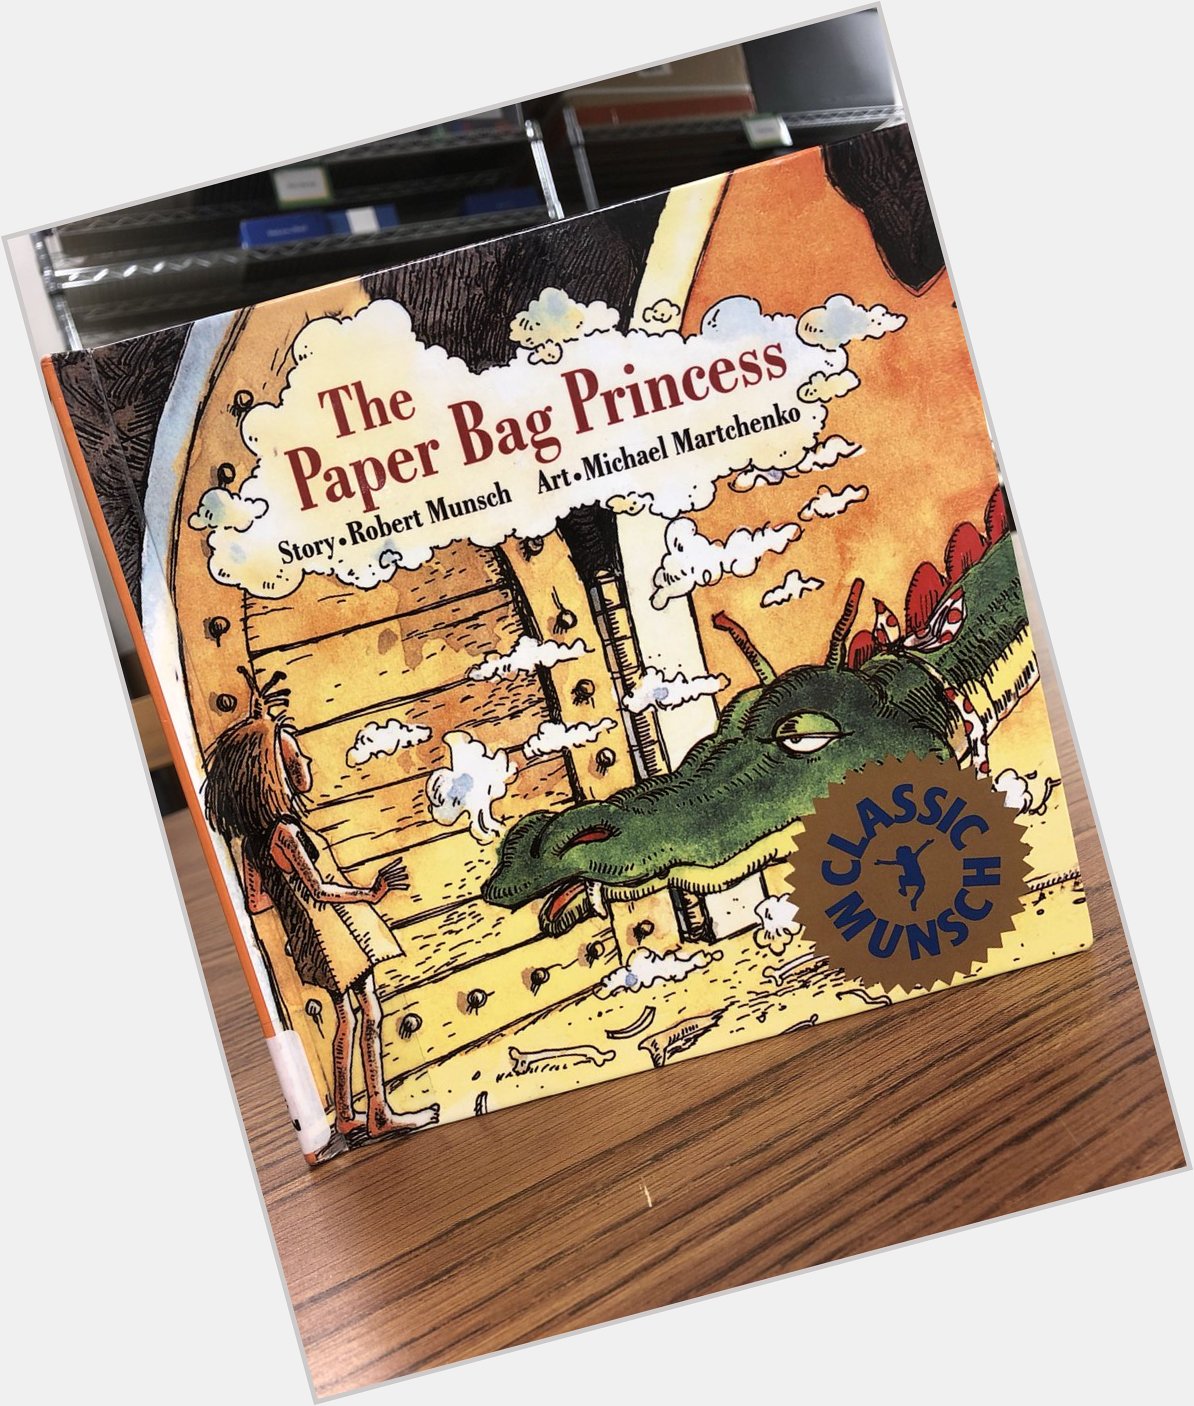 Happy Birthday, Robert Munsch, author of the Paper Bag Princess! What was your favorite children s book? 